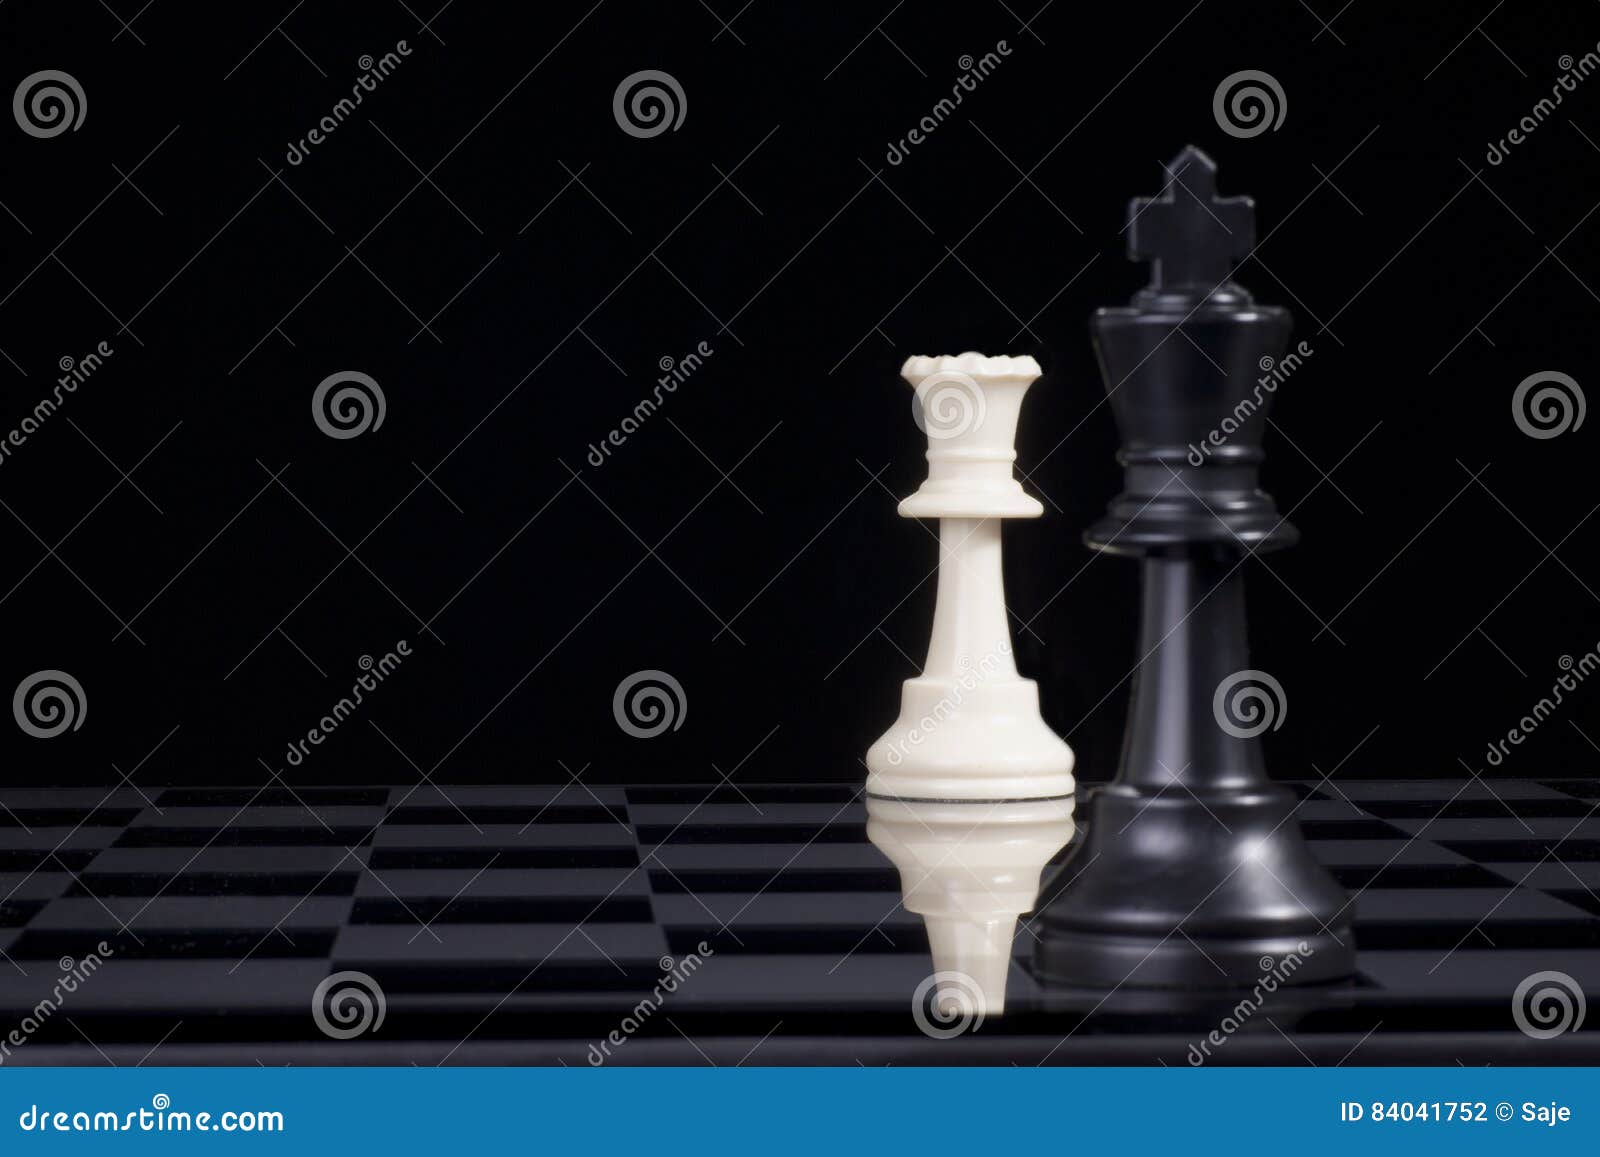 How to Checkmate With a King and Queen